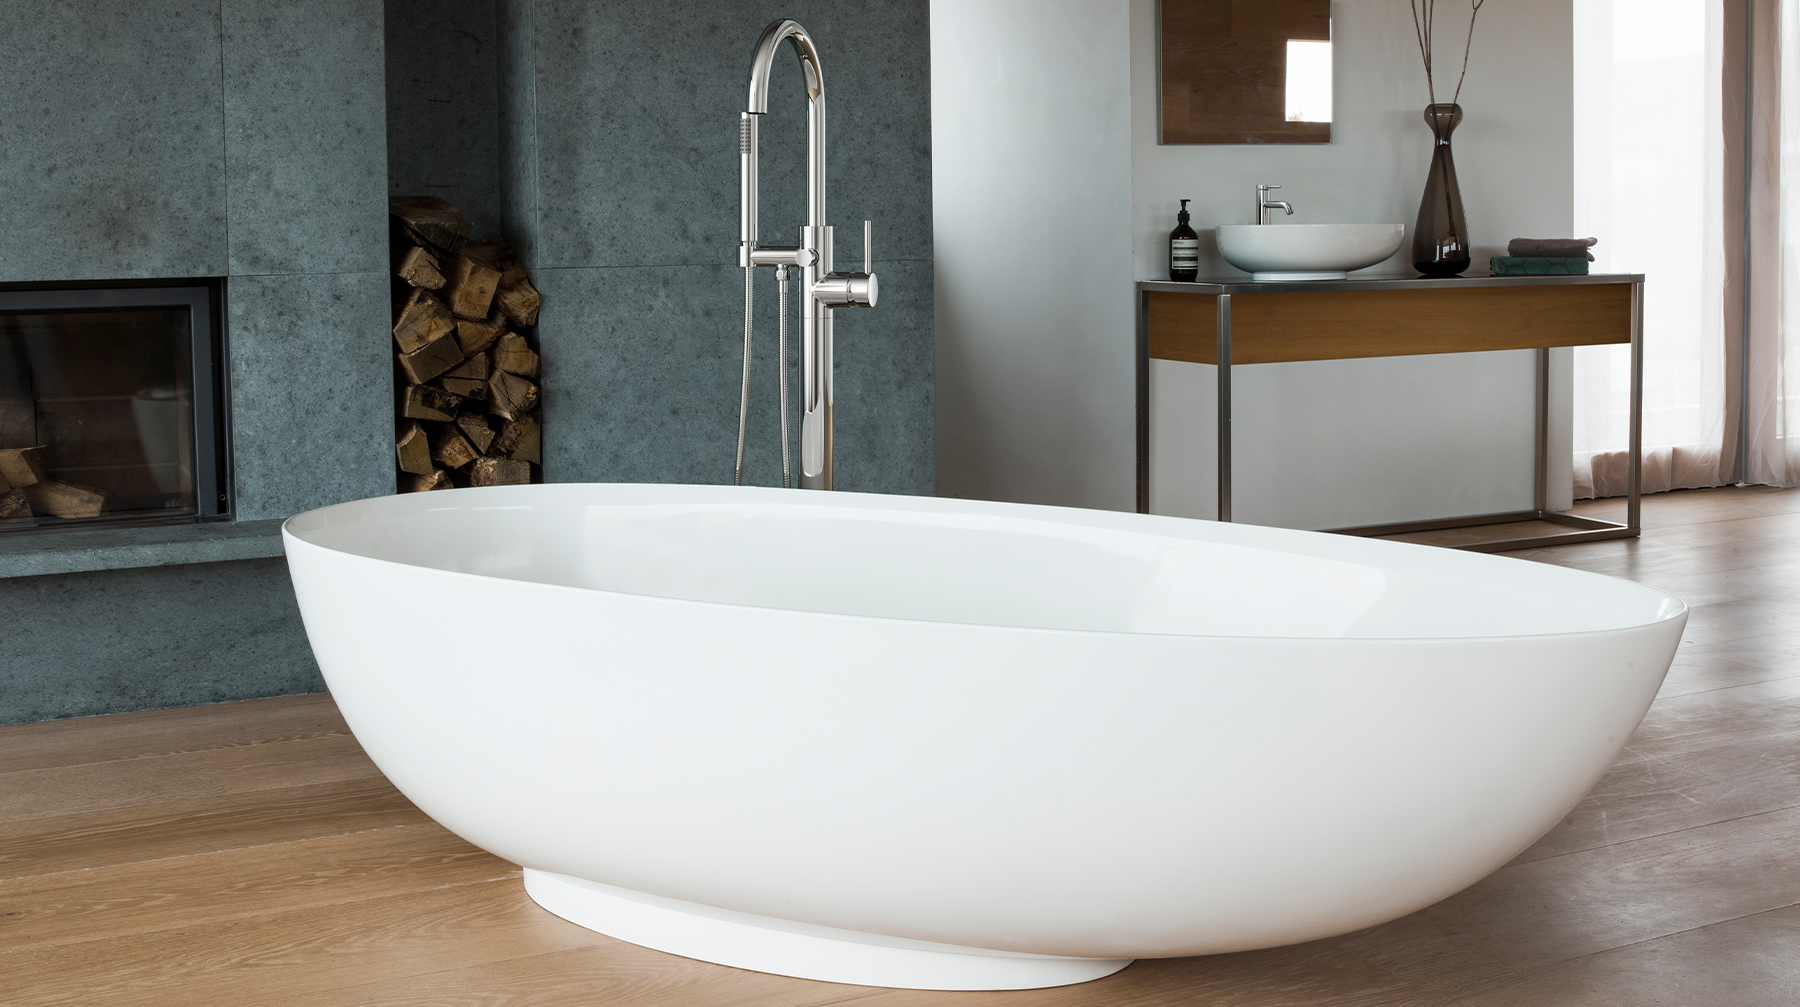 Luxury Bathroom Ideas | Relax in the decadence of a luxury bath and basin to accentuate your stone bathroom